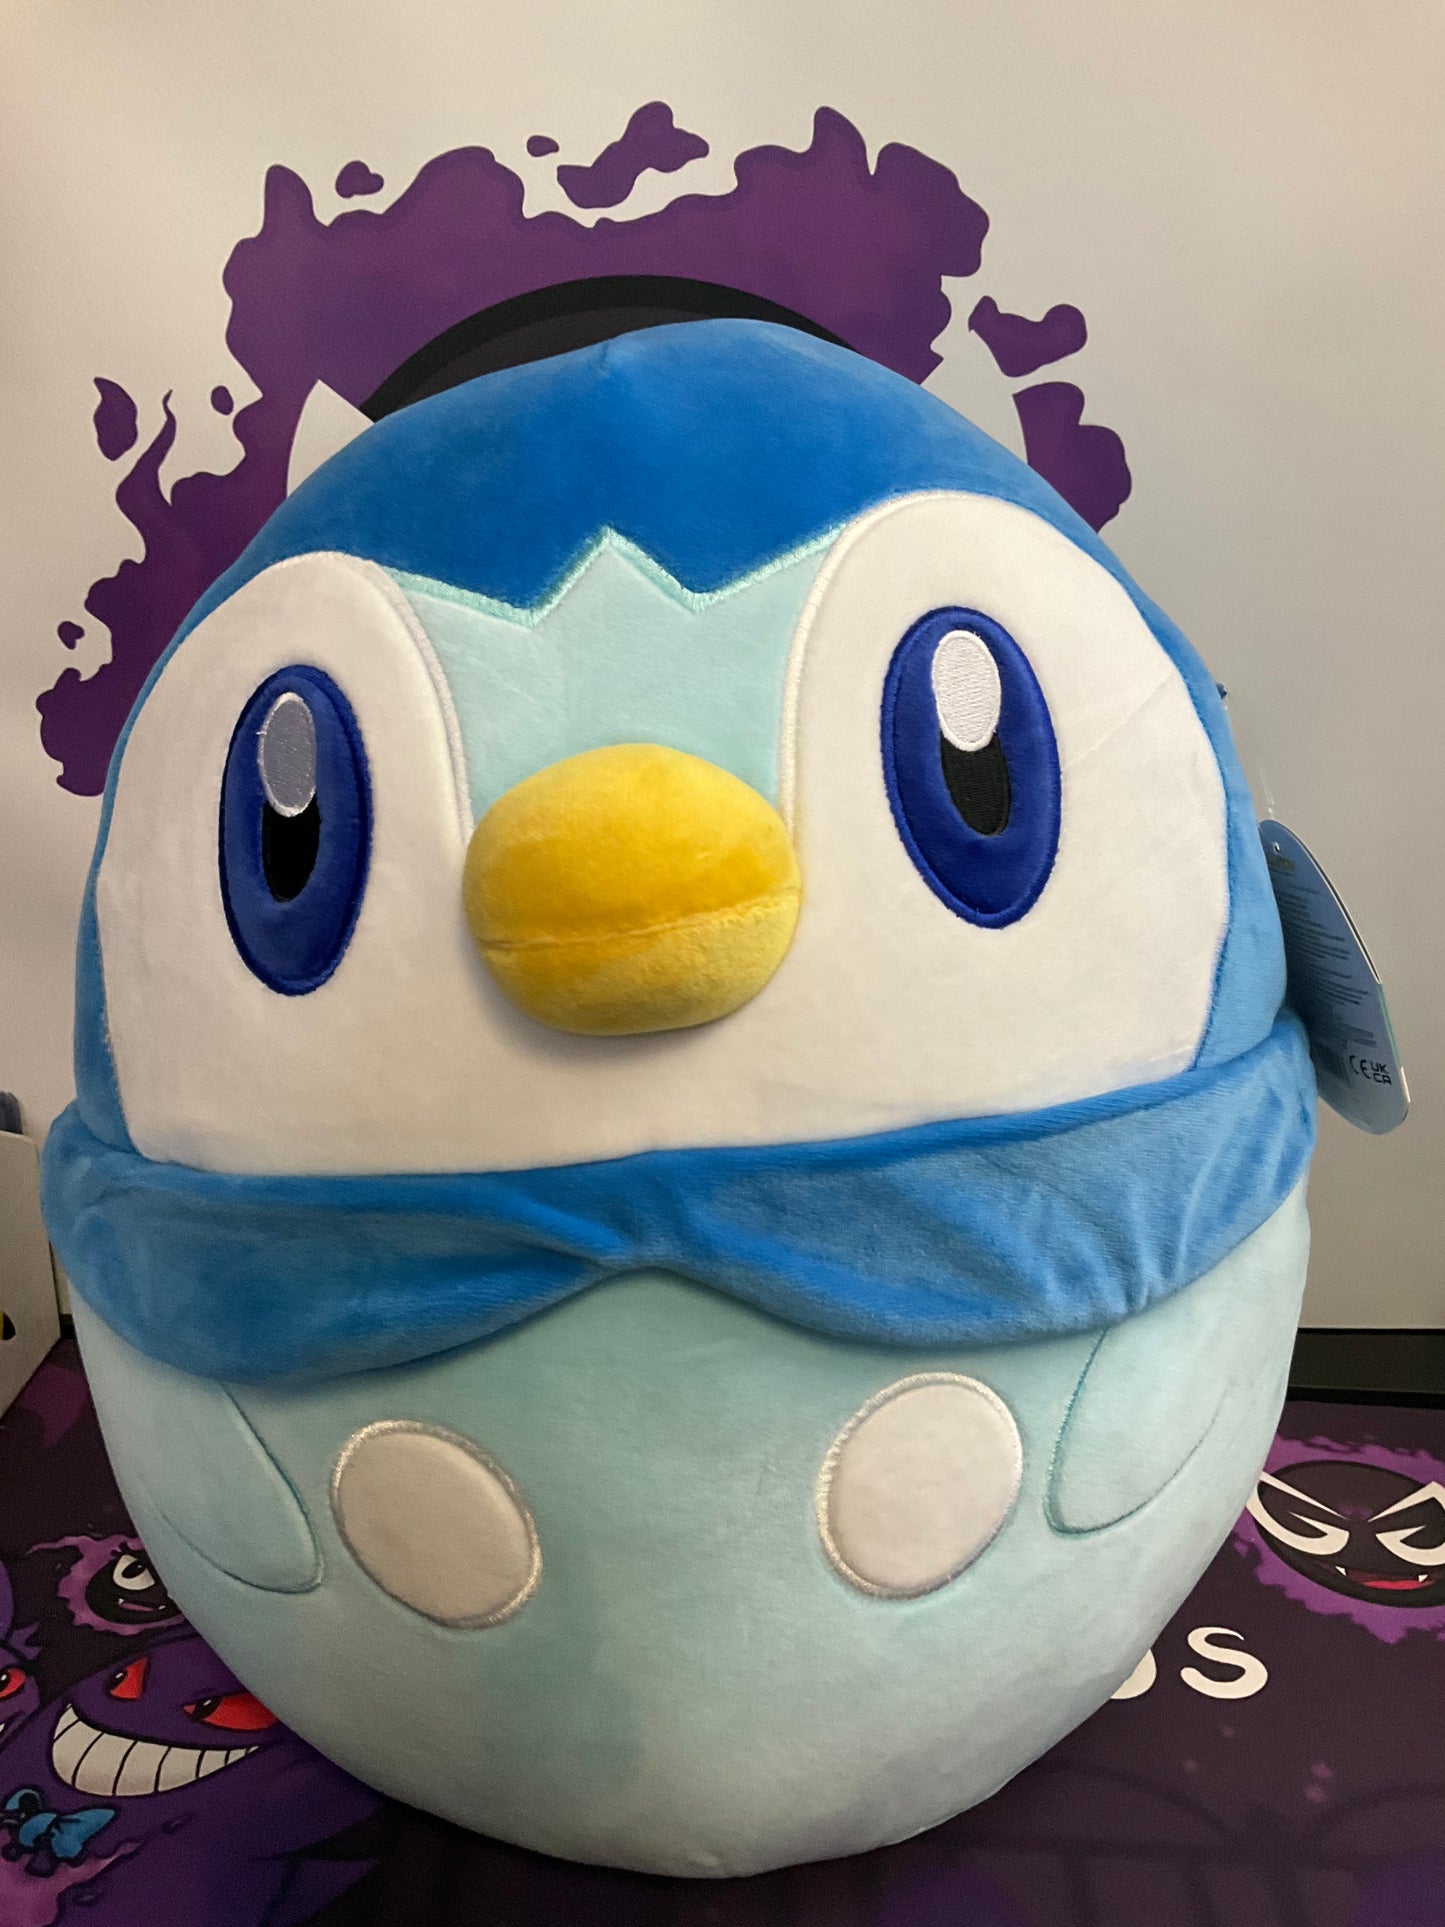 Pokémon Piplup Squishmallow 17in